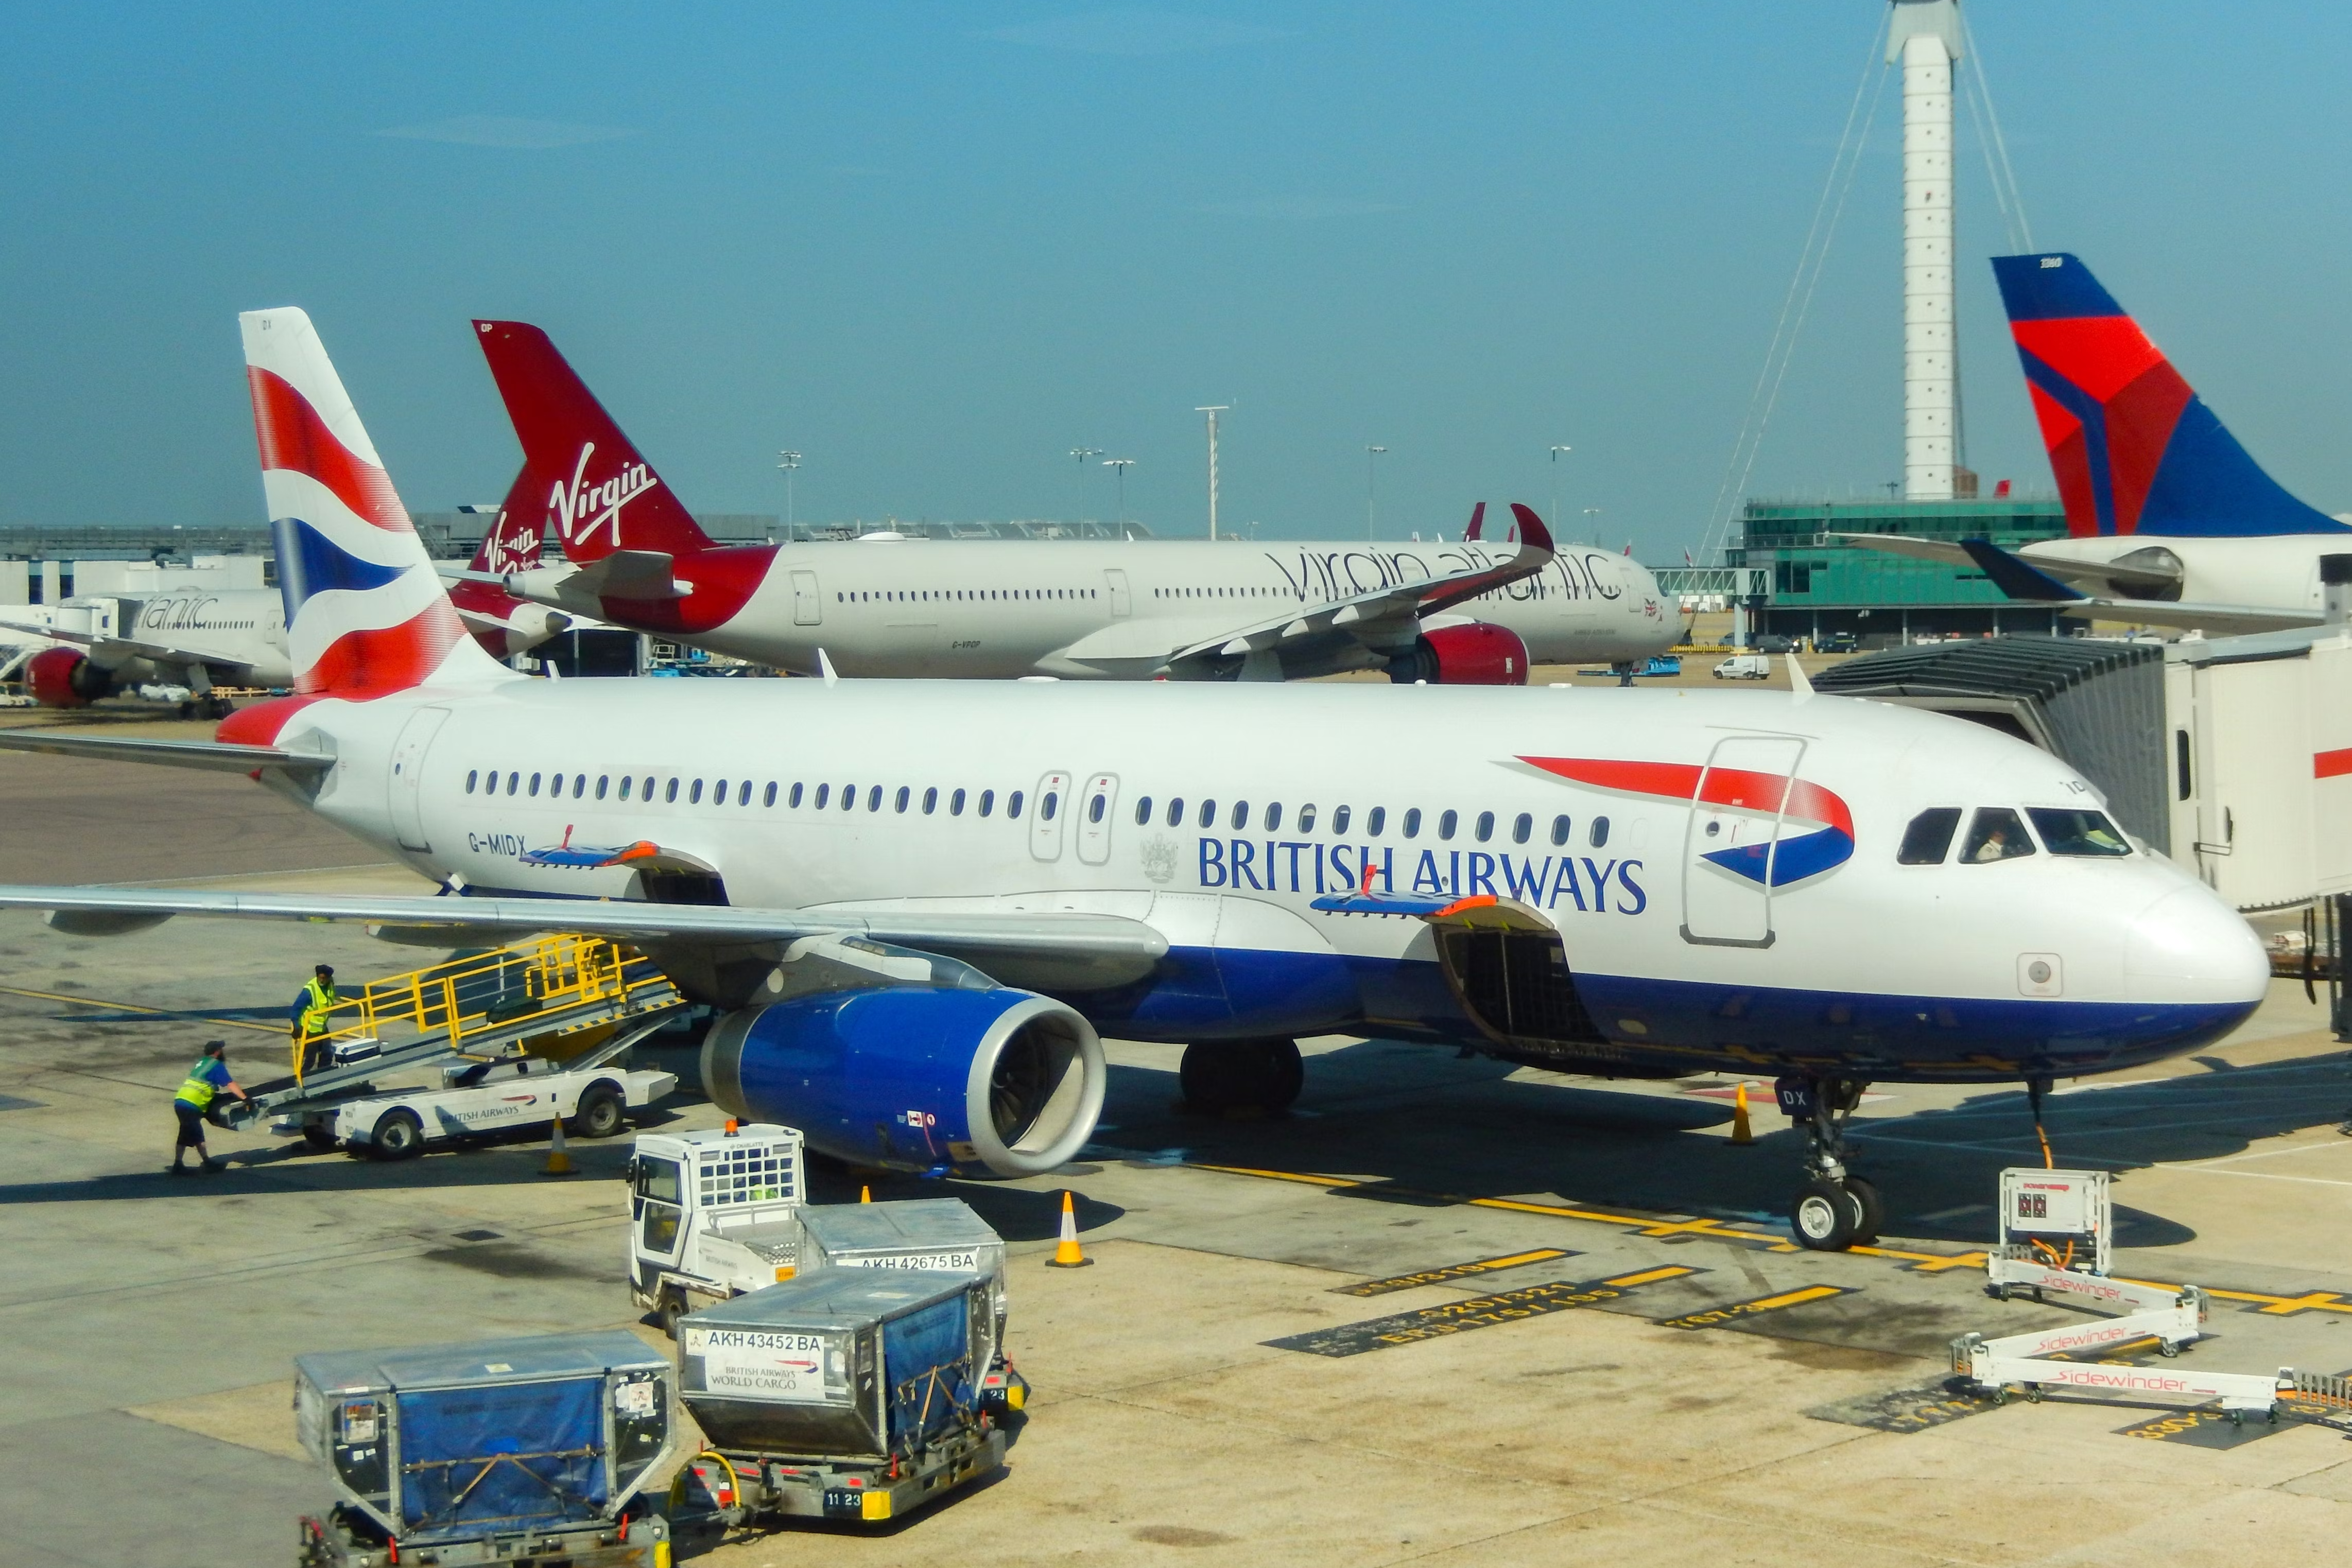 A British Airways Airbus A320 parked at the terminal in Heathrow Airport.